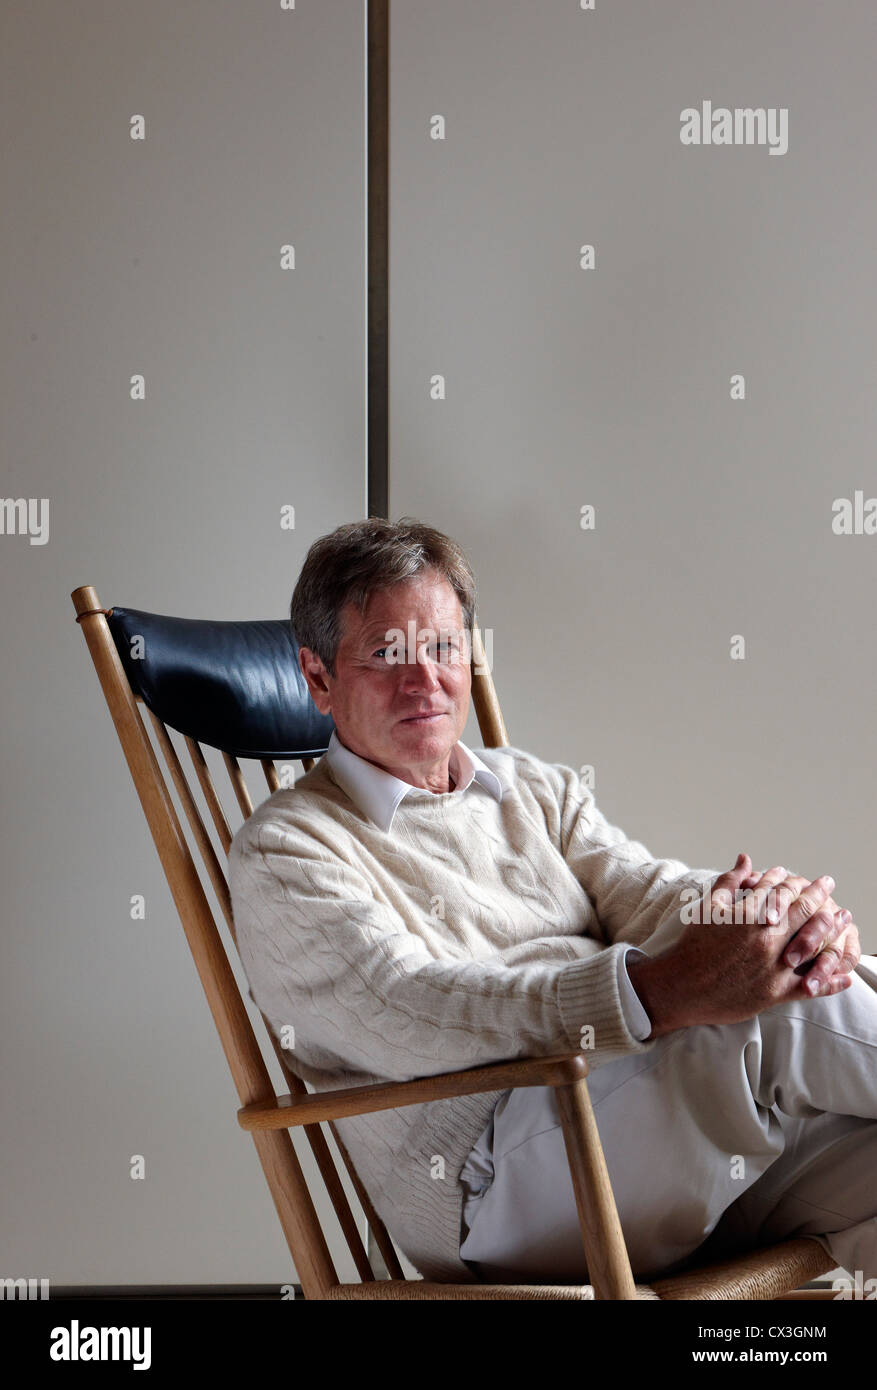 John Pawson at home, London, United Kingdom. Architect: John Pawson, 2010. Portrait of Architect John Pawson, leaning back on a Stock Photo